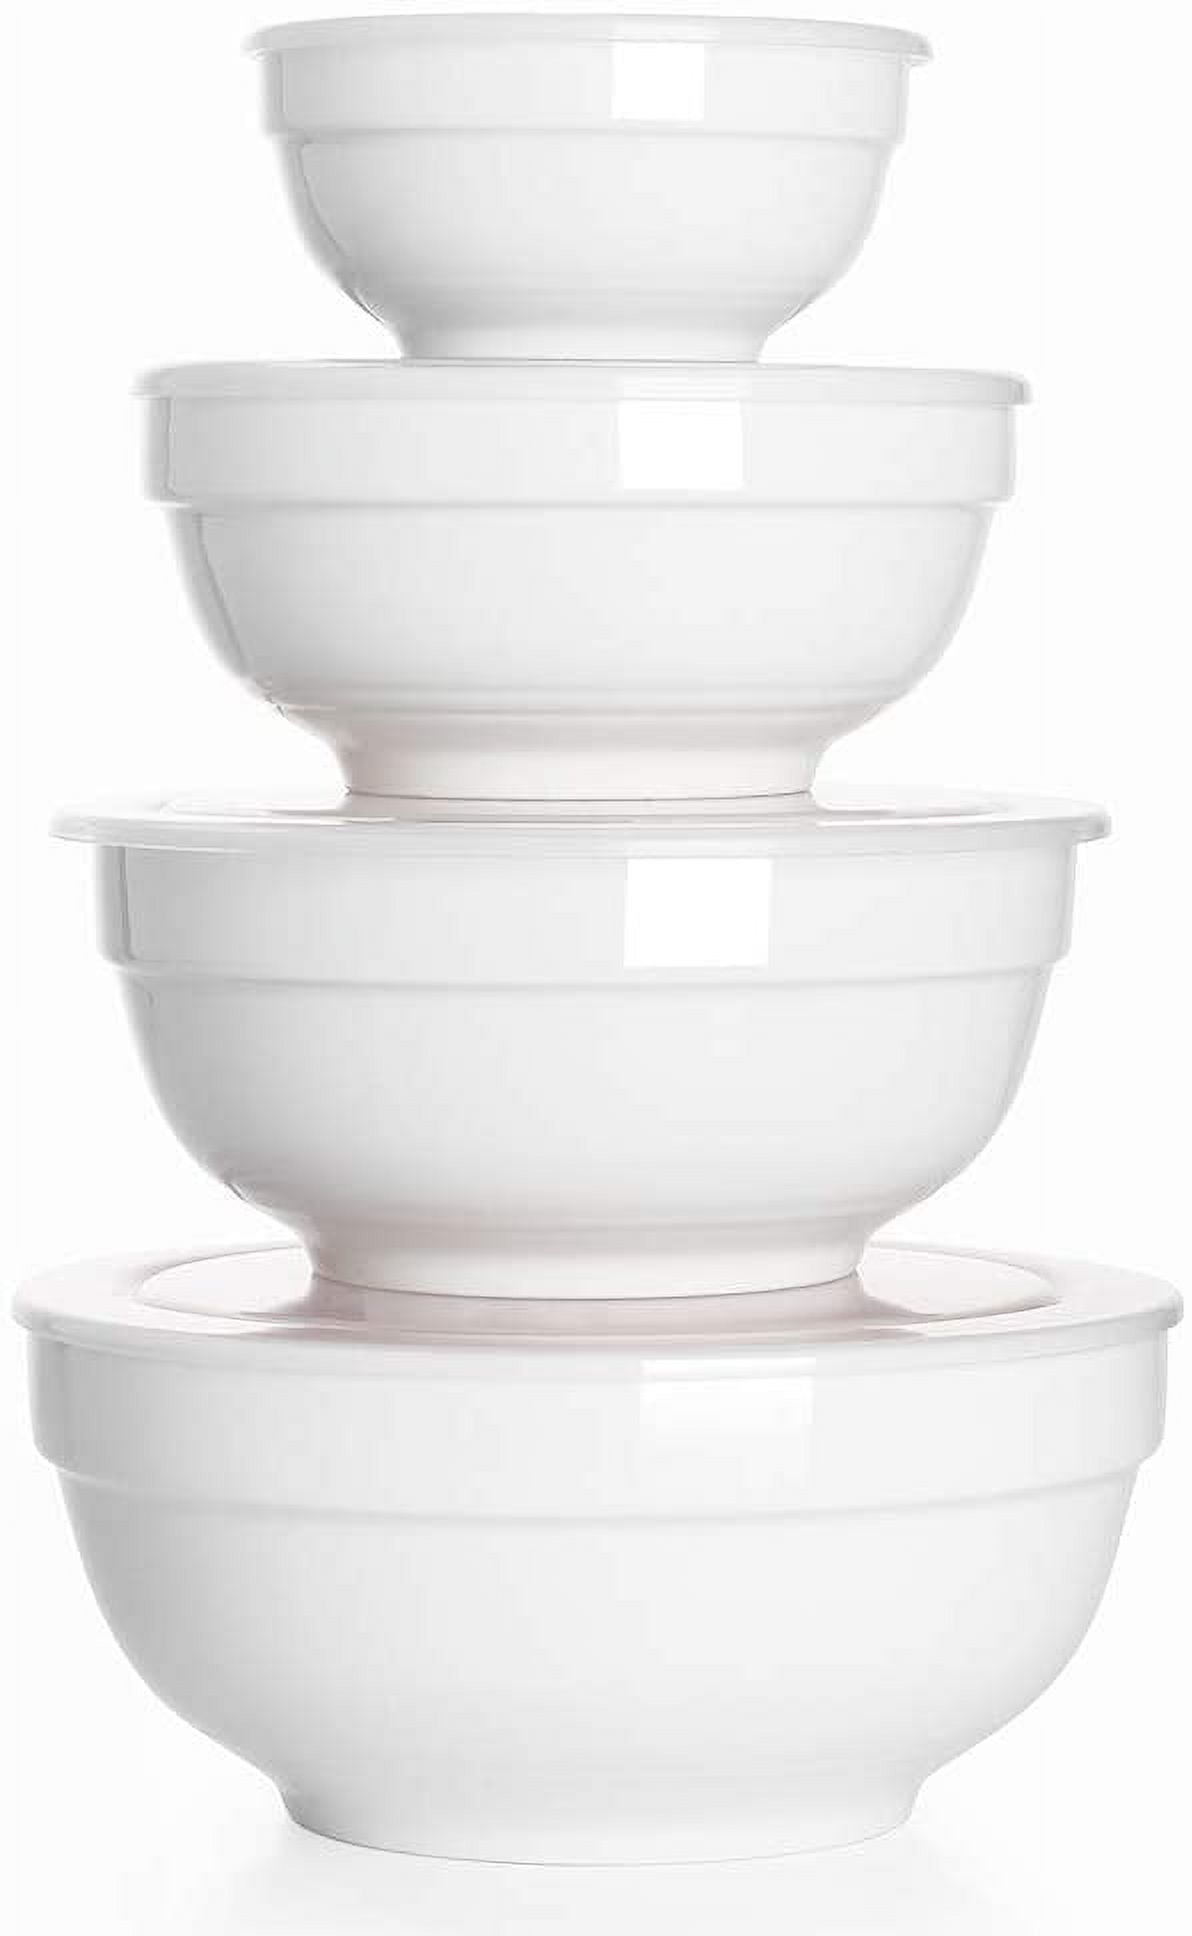 Multi-Color Round Mixing Bowls W/ Lids Stackable Storing & Warming Food  12-Piece